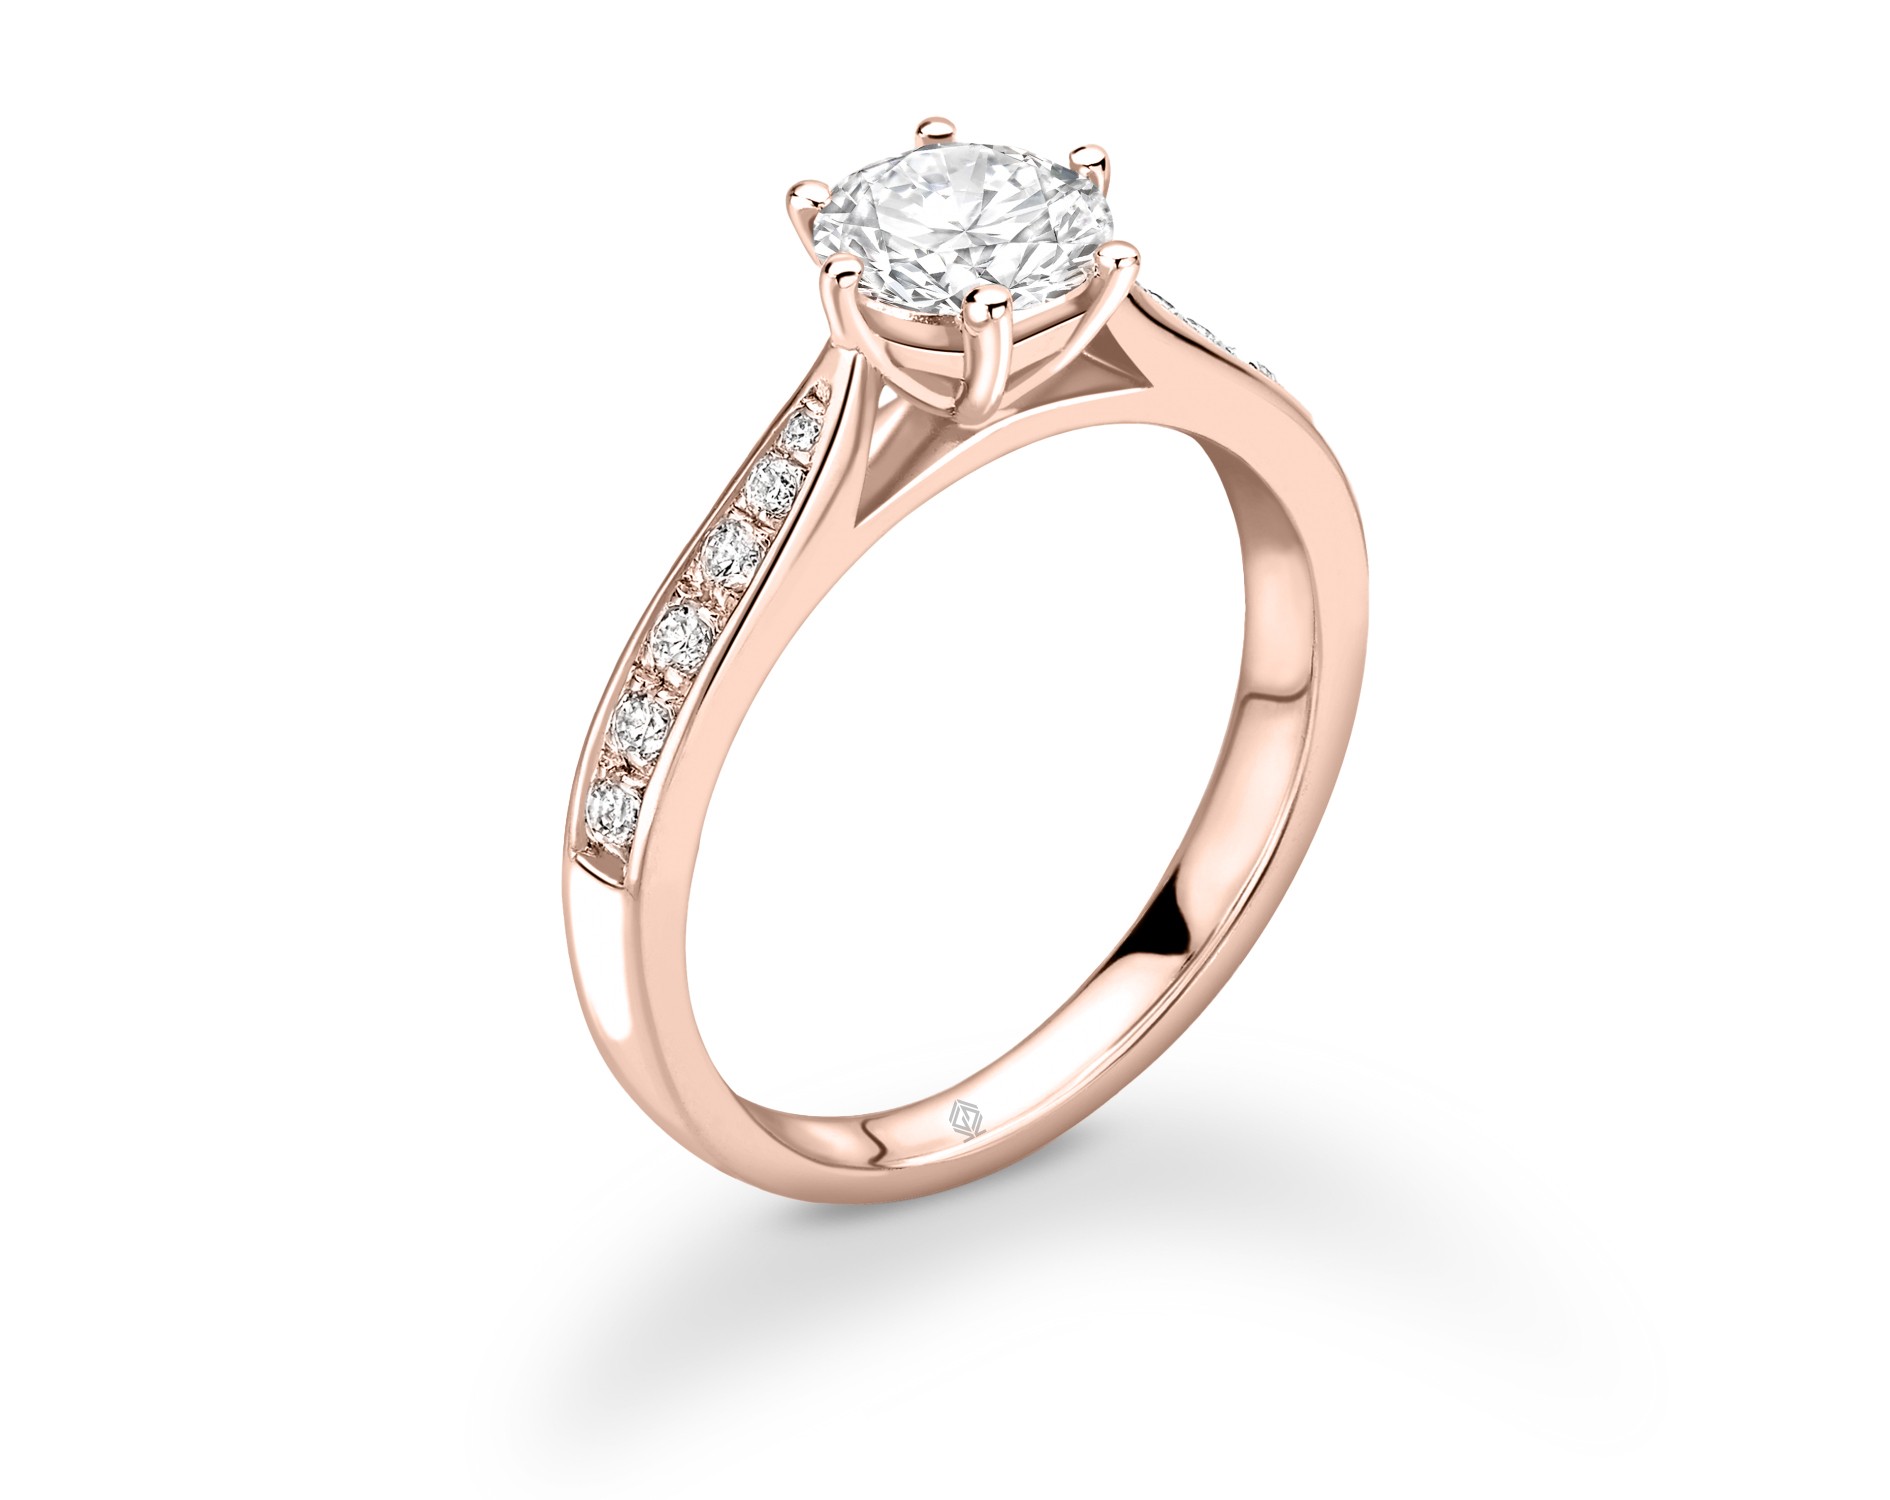 18K ROSE GOLD 6 PRONGS ROUND CUT DIAMOND ENGAGEMENT RING WITH SIDE STONES CHANNEL SET